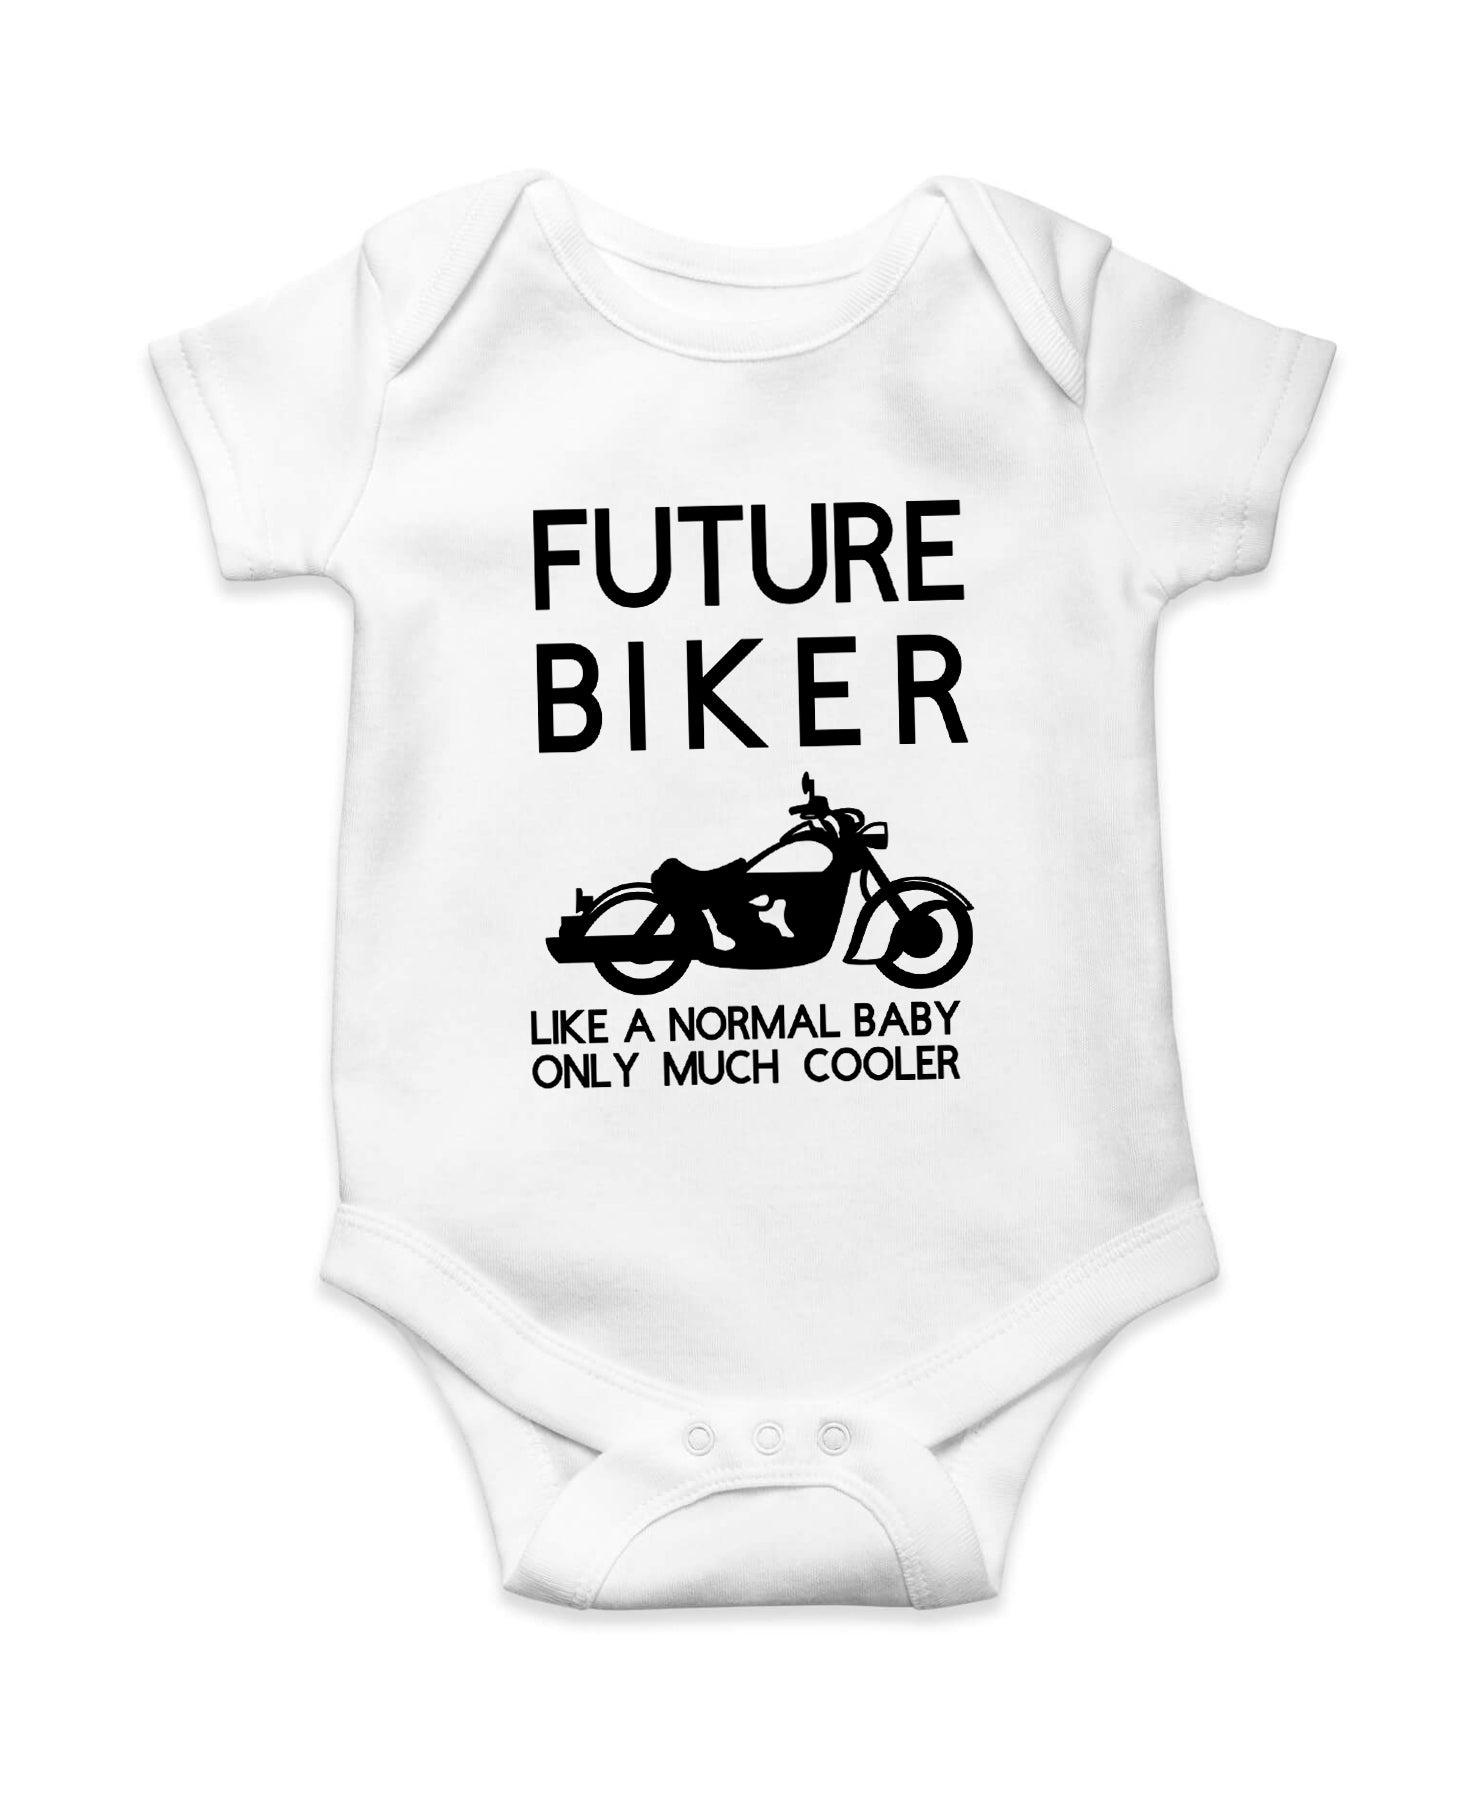 Future Biker Like A Normal Baby Only Much Cooler Baby Onesie